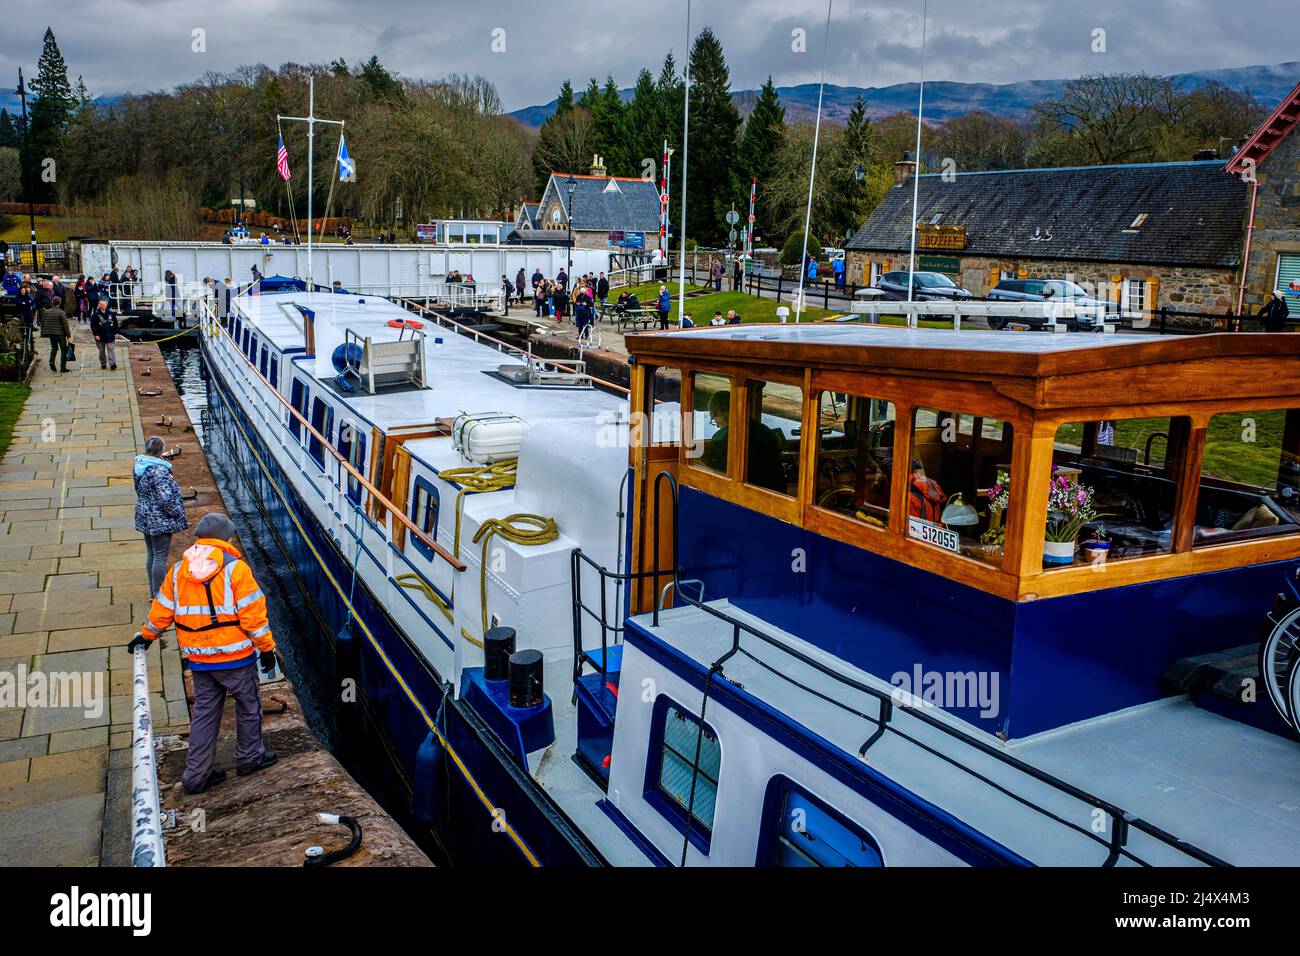 The tourist cruiser Scottish Highlander making its way through the Caledonian Canal and into Loch Ness, Scotland Stock Photo